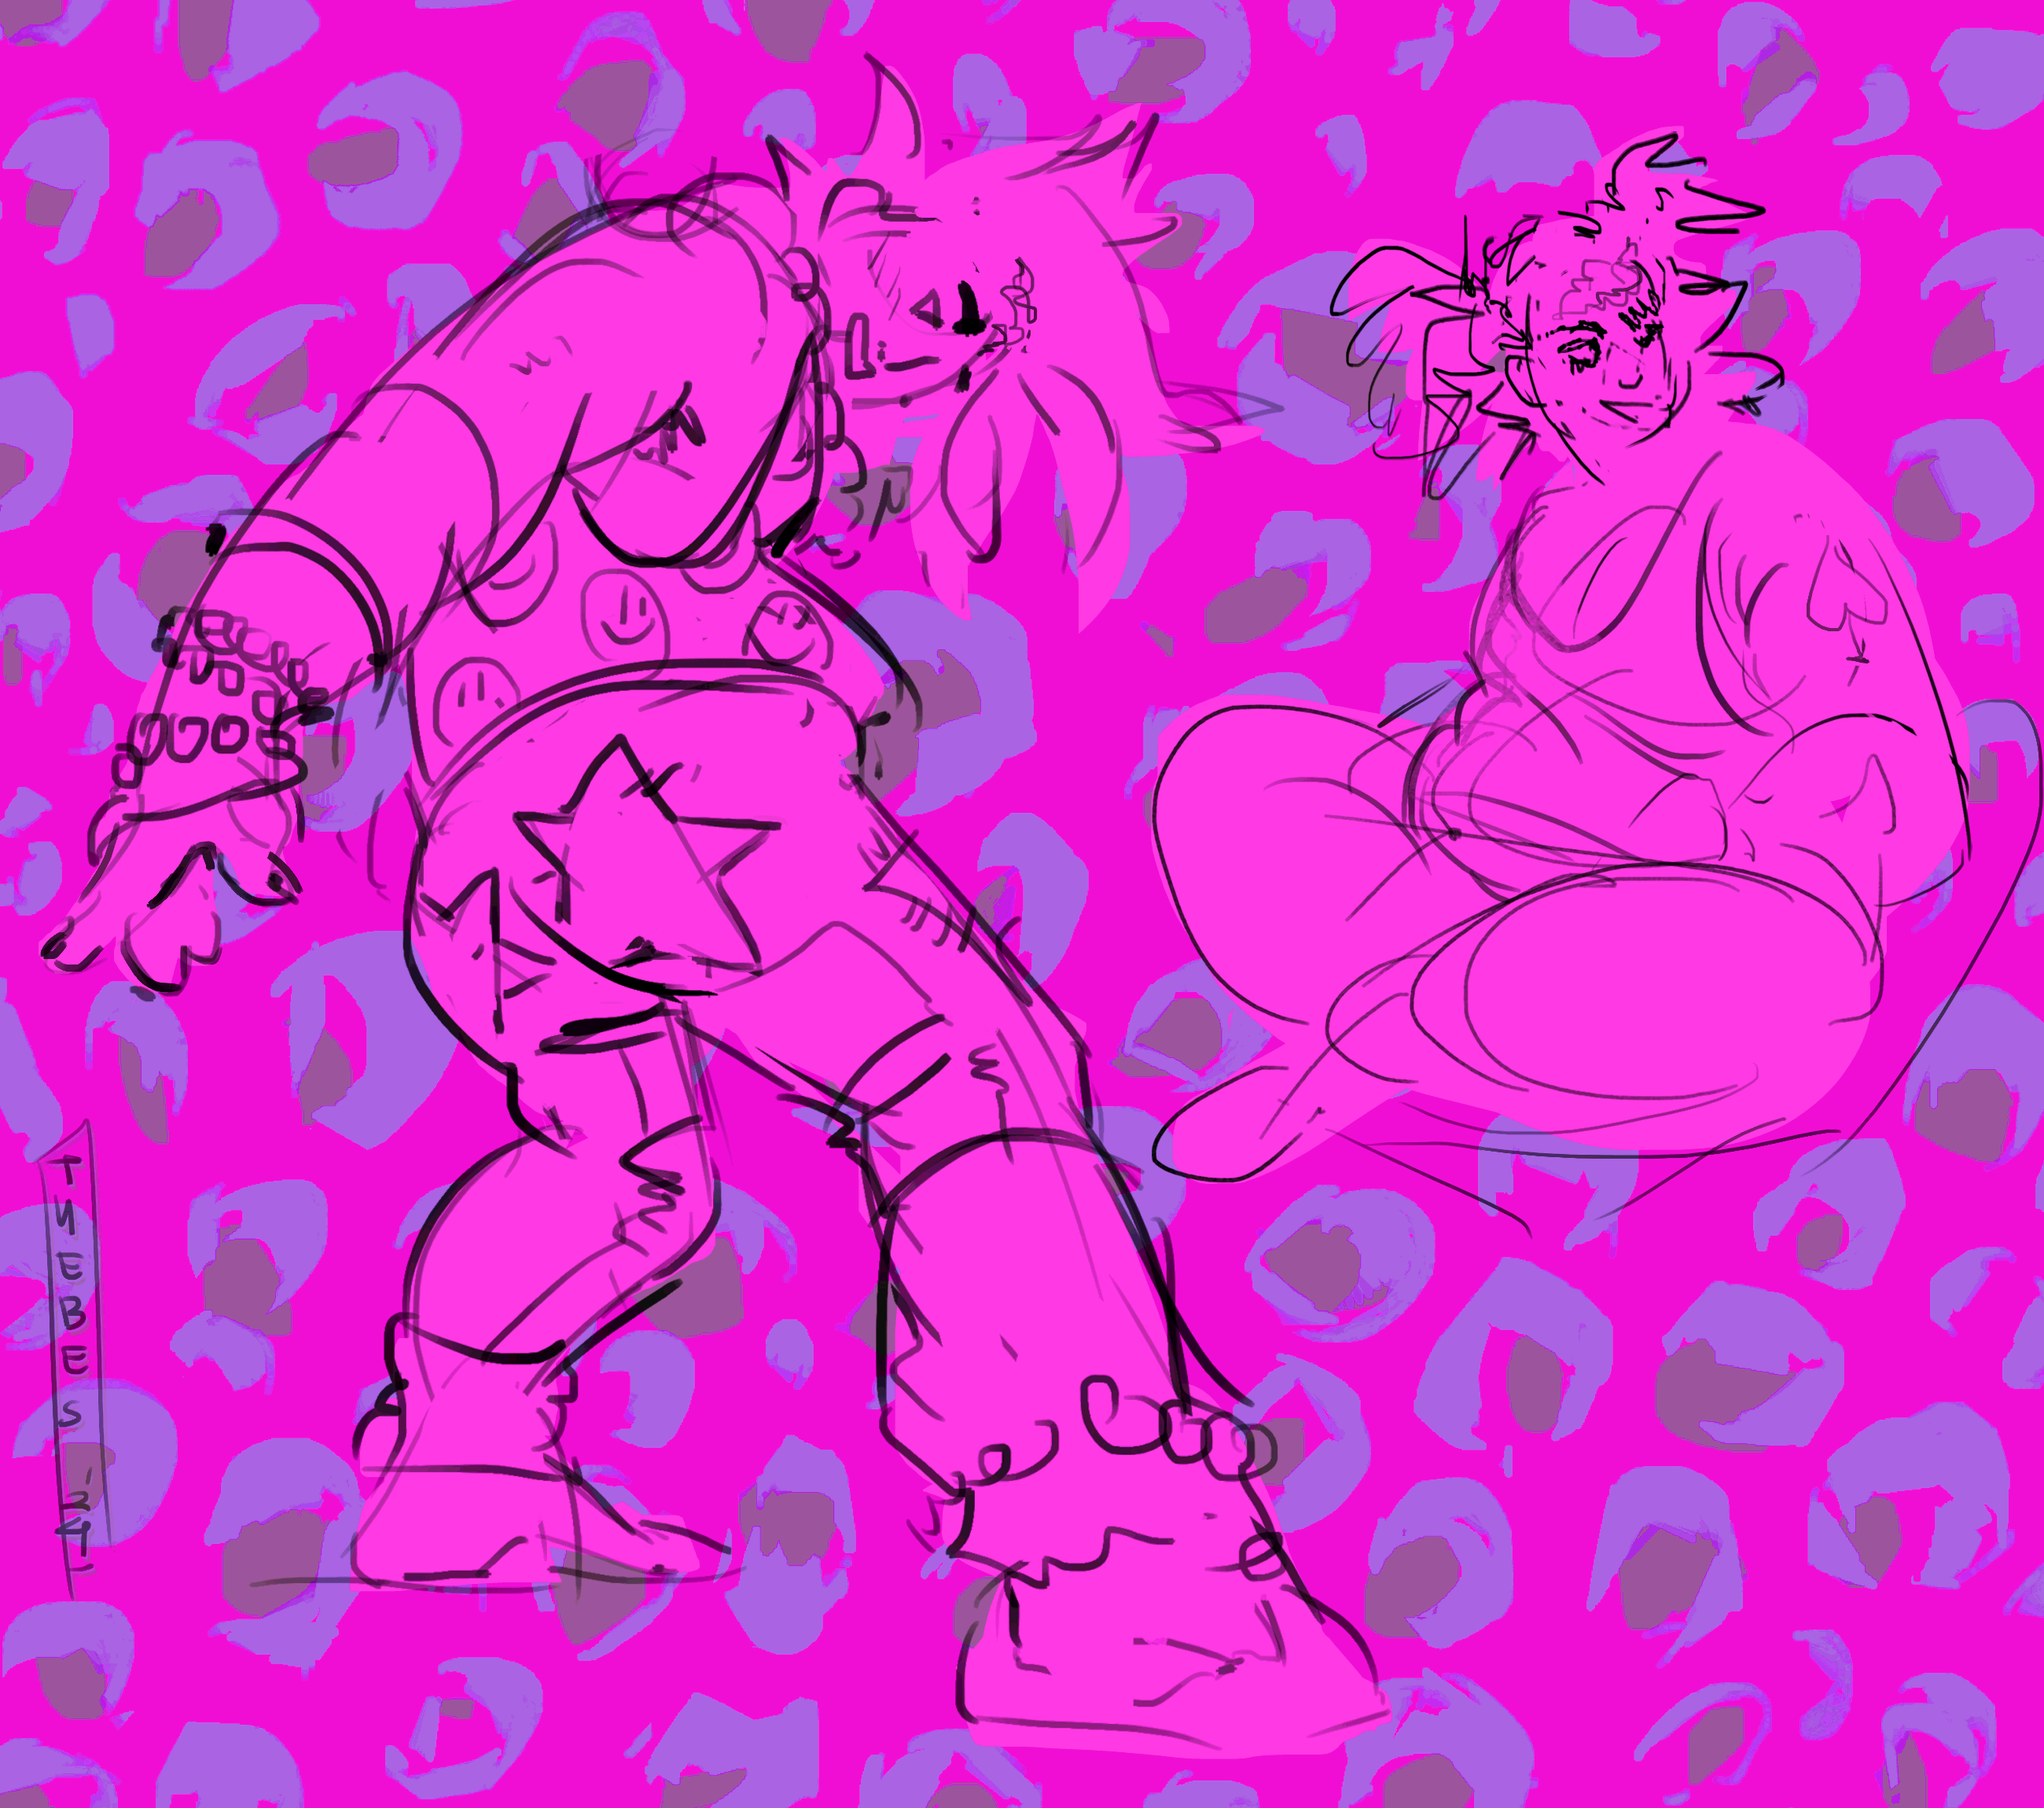 two sketches of a standing and sitting character against neon pink leopard print